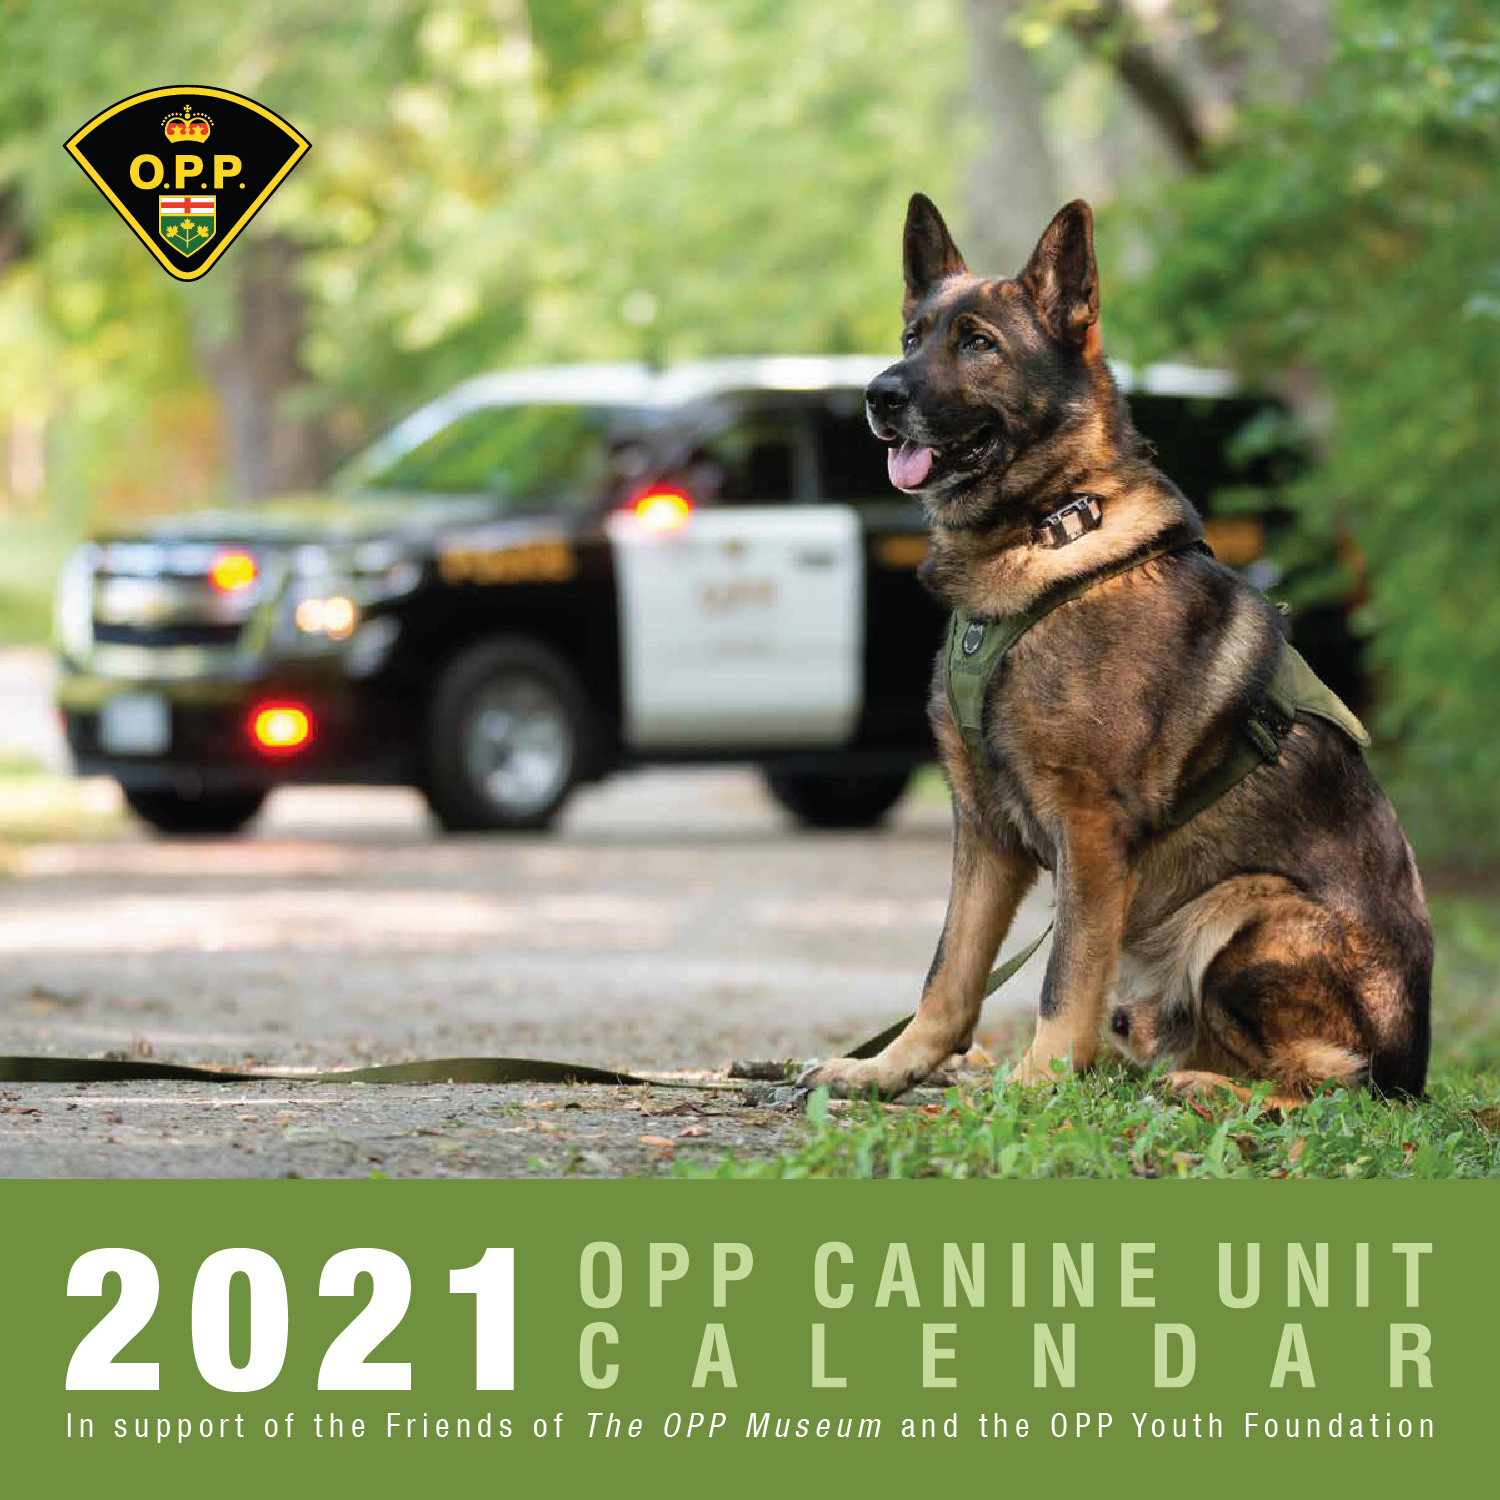 purchase-an-opp-canine-calendar-with-proceeds-supporting-opp-youth-foundation-muskoka411